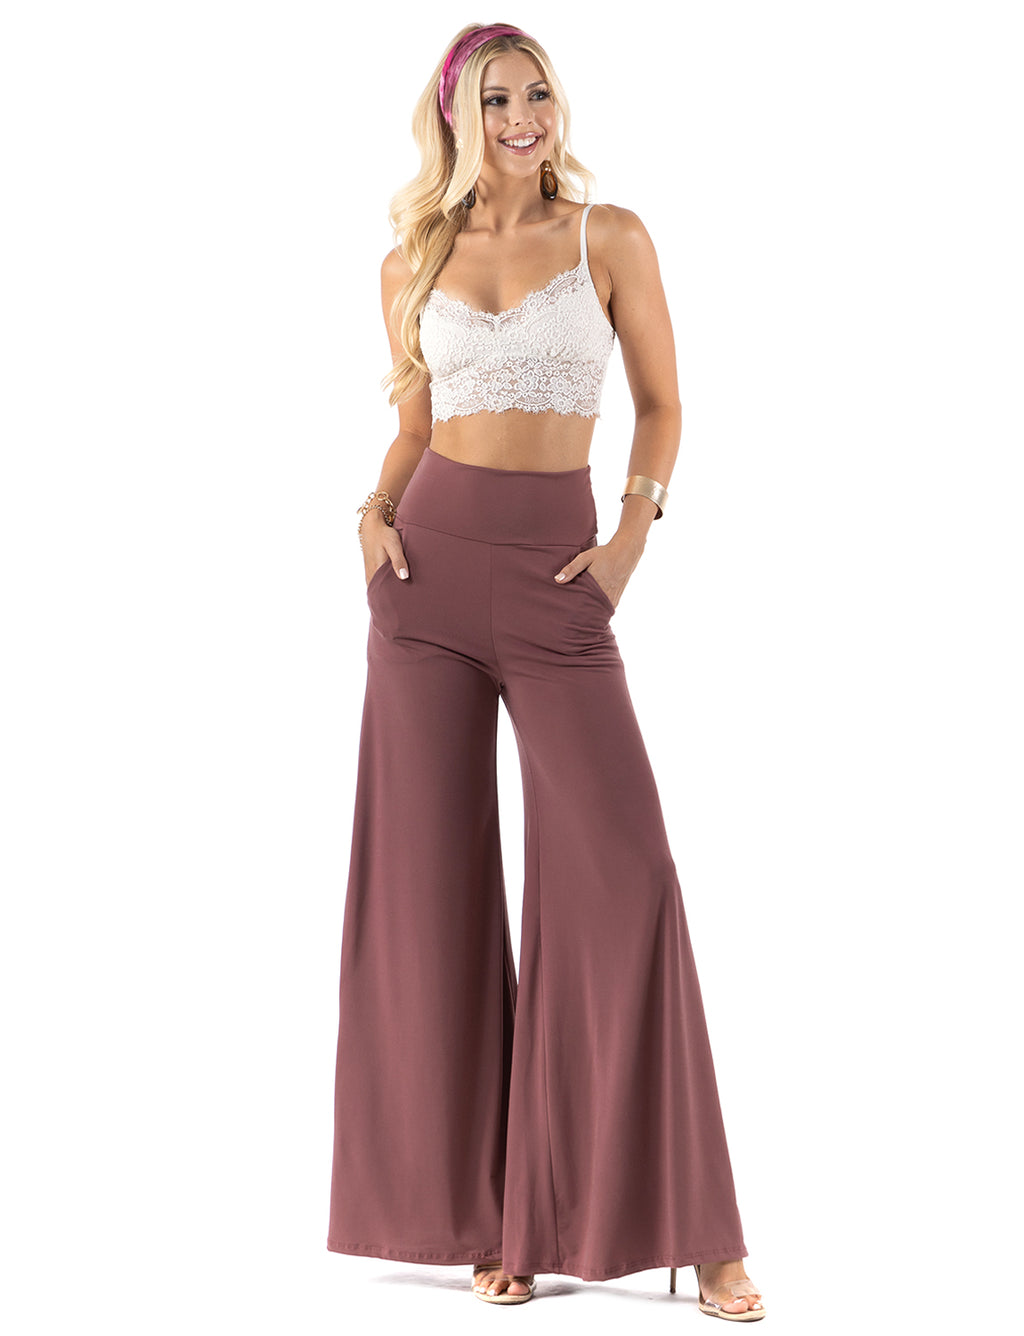 Beautiful woman wearing this amazing Mauve High waist palazzo pants featuring pockets, wide legs, and a comfortable stretchy fabric